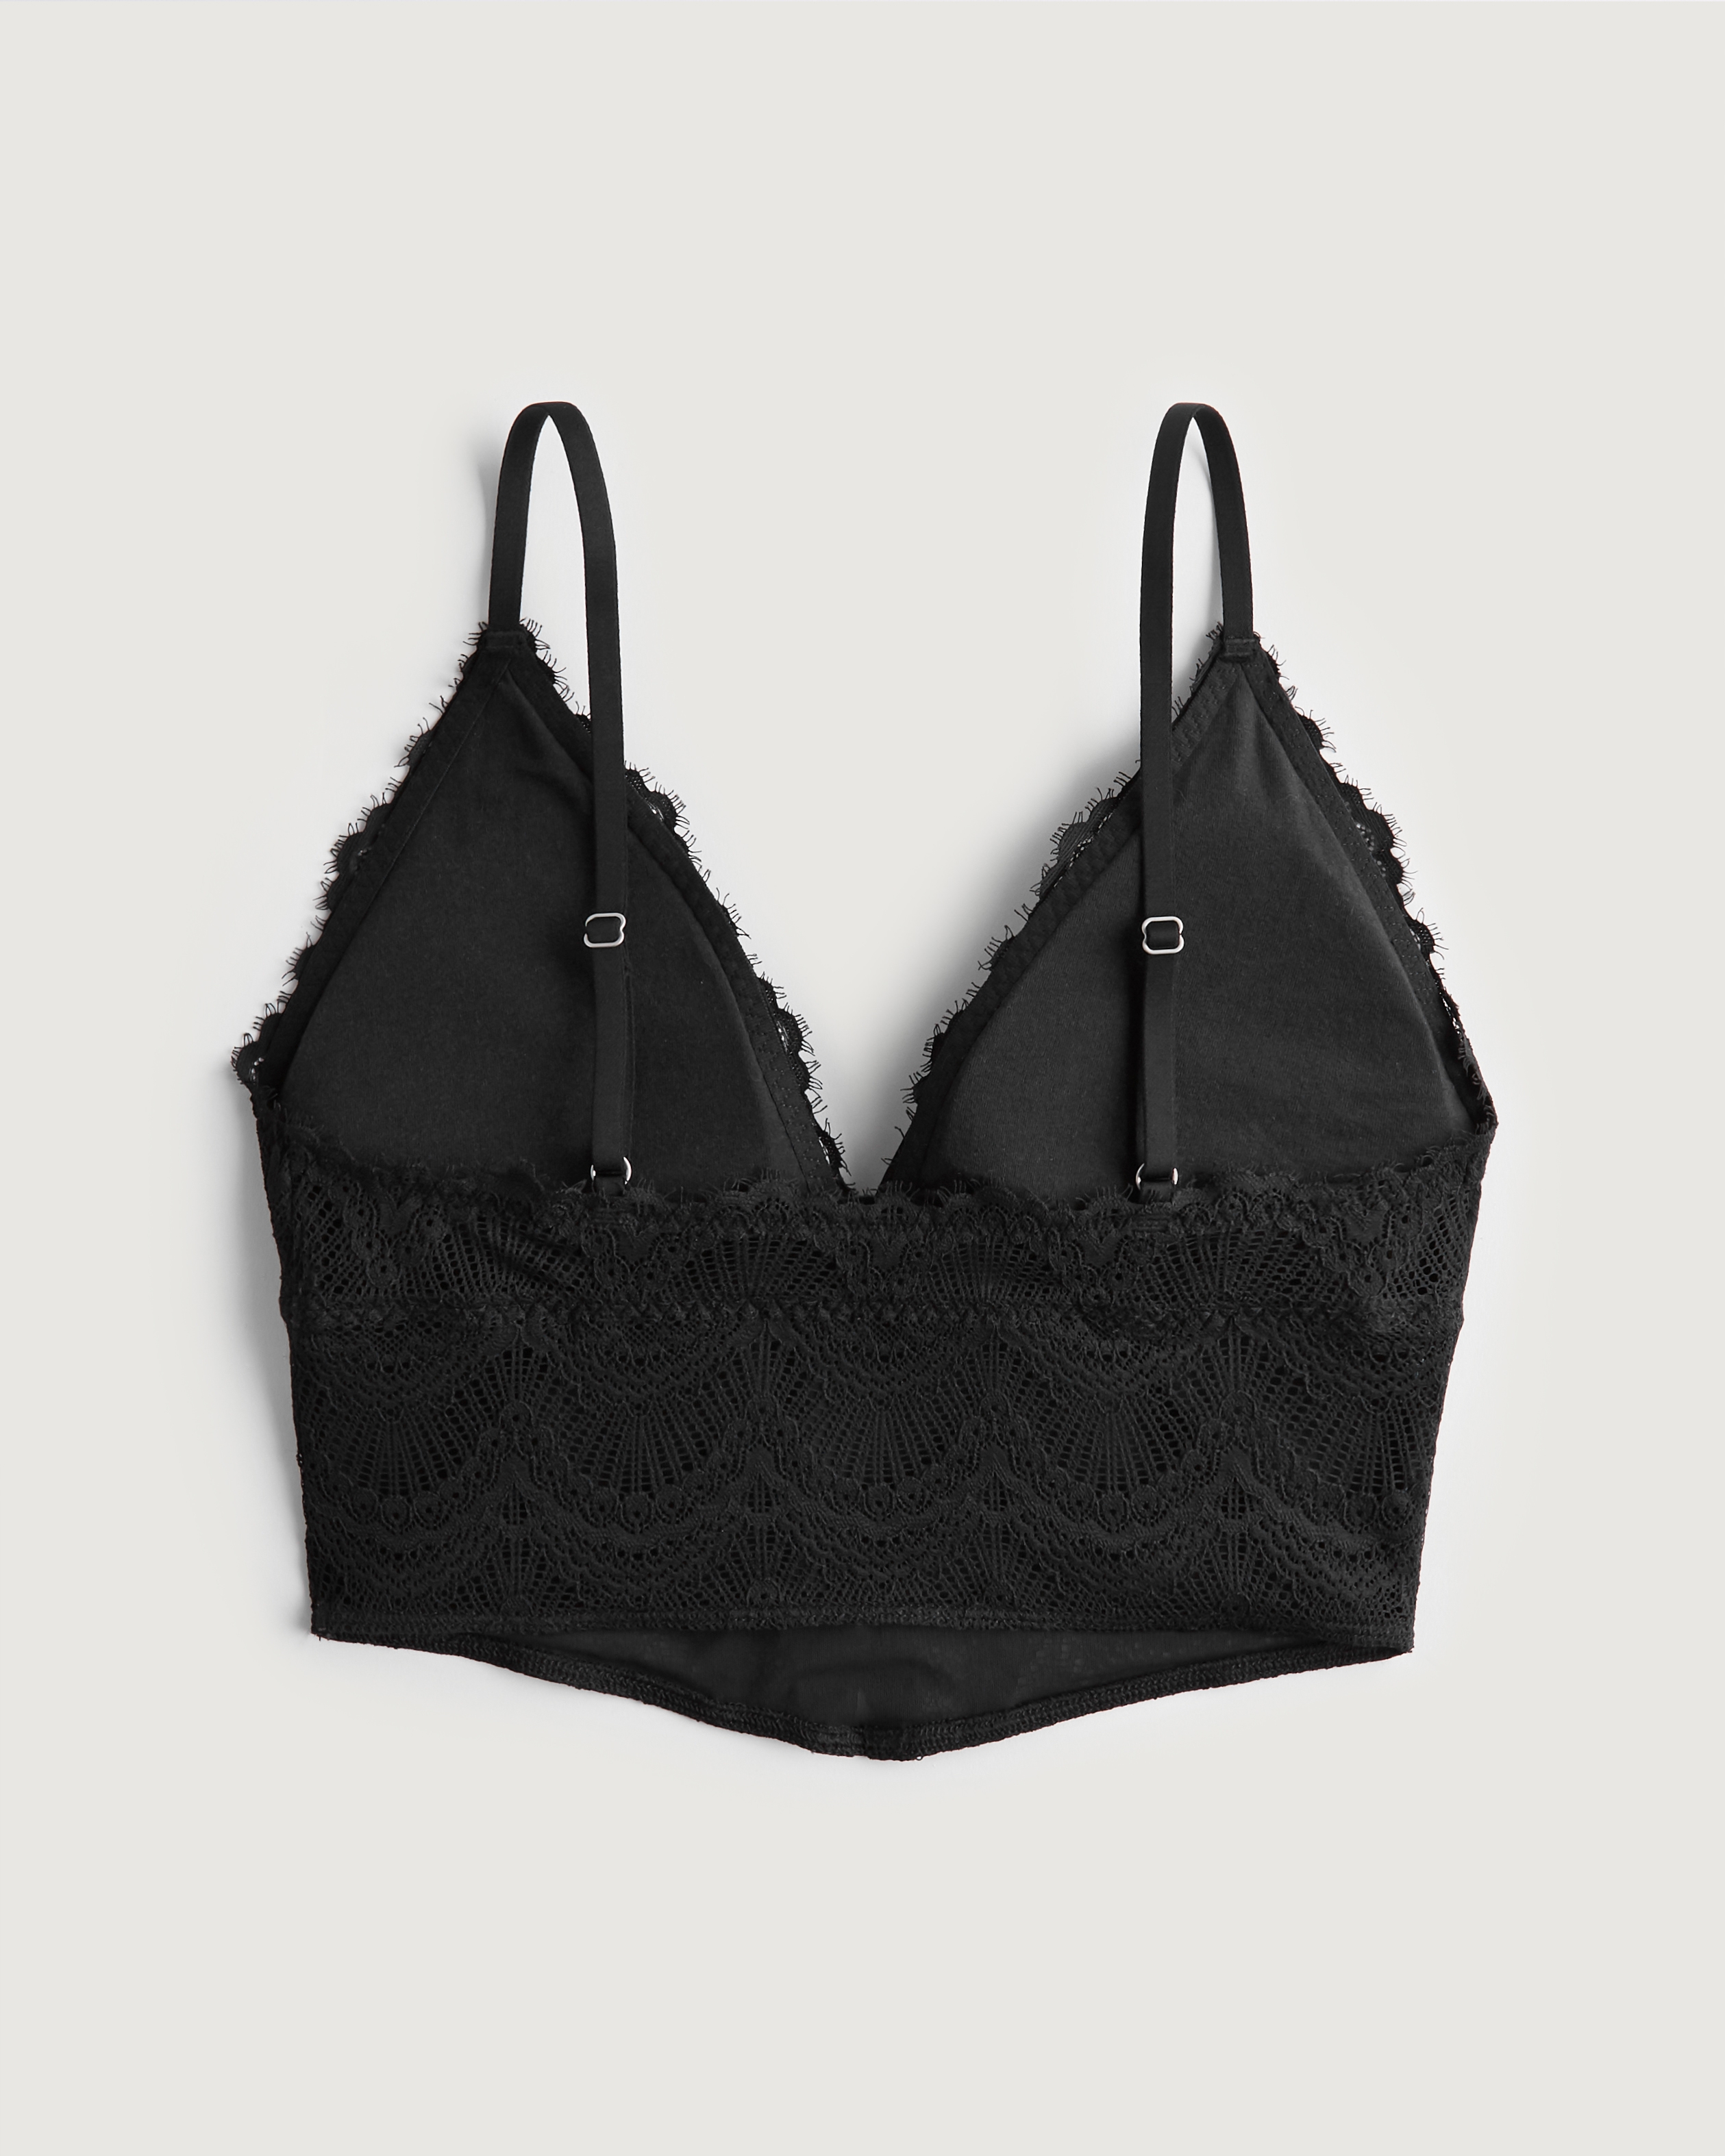 Hollister Gilly Hicks Lace Corset Bra Top